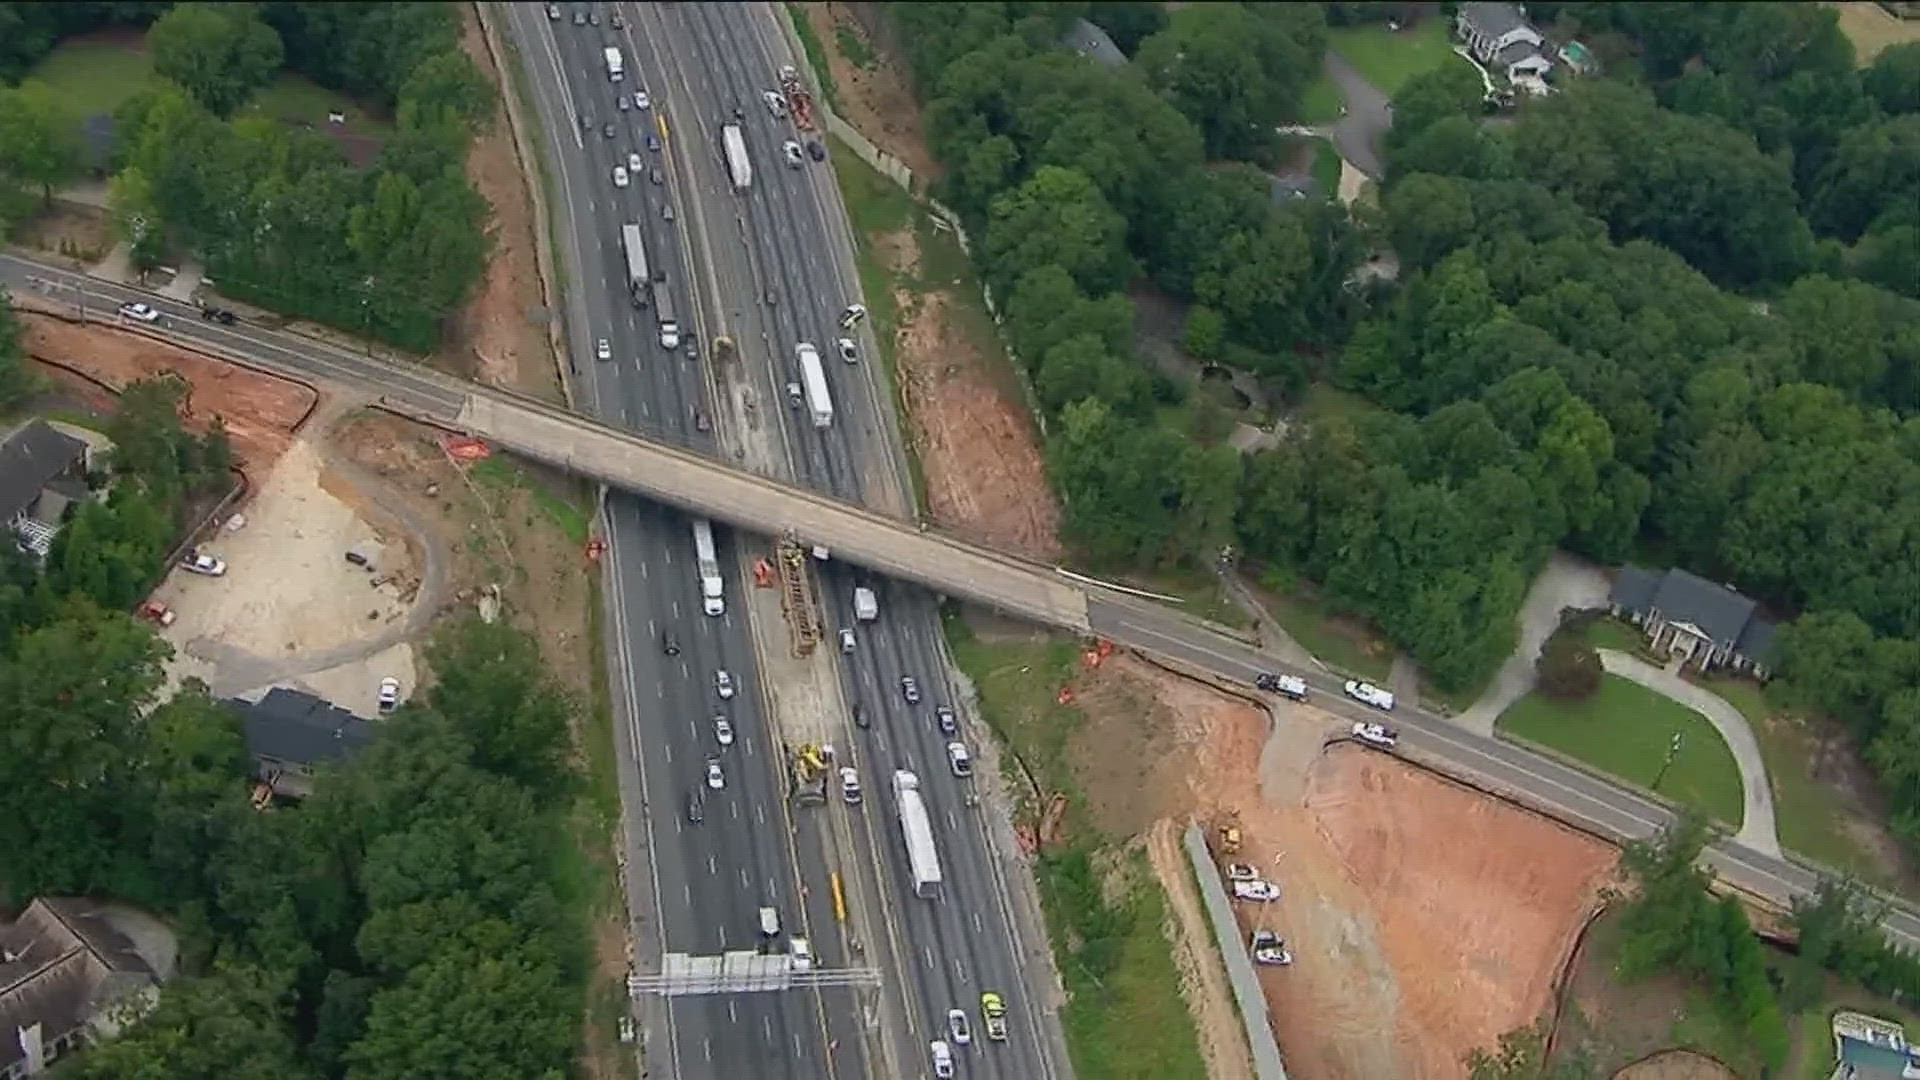 The Mount Vernon Highway bridge is permanently closed while crews build a new one.